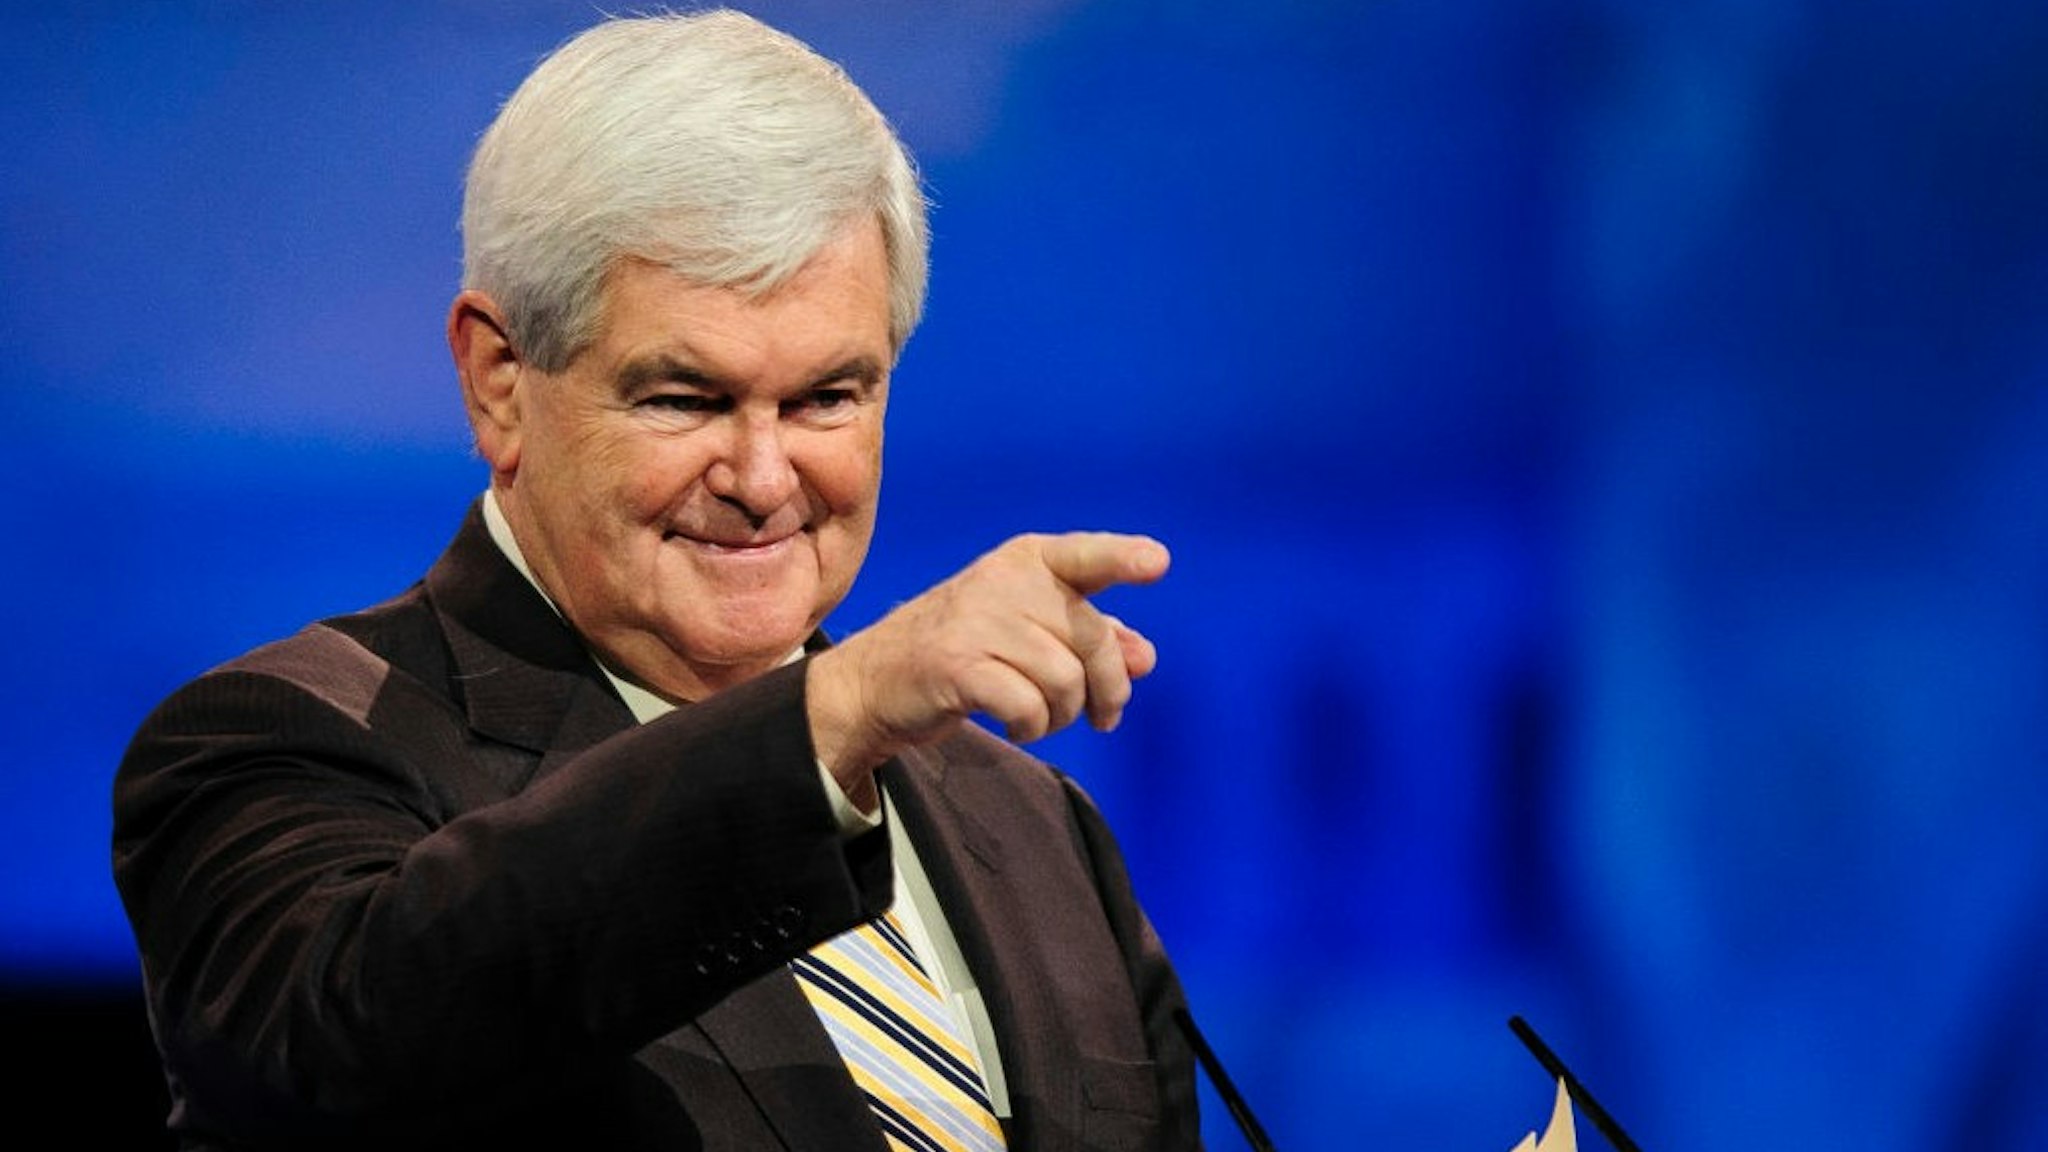 NATIONAL HARBOR, MD - MARCH 16: Newt Gingrich, former presidential candidate and Speaker of the U.S. House of Representatives, speaks at the 2013 Conservative Political Action Conference (CPAC) March 16, 2013 in National Harbor, Maryland. The American Conservative Union held its annual conference in the suburb of Washington, DC to rally conservatives and generate ideas. (Photo by